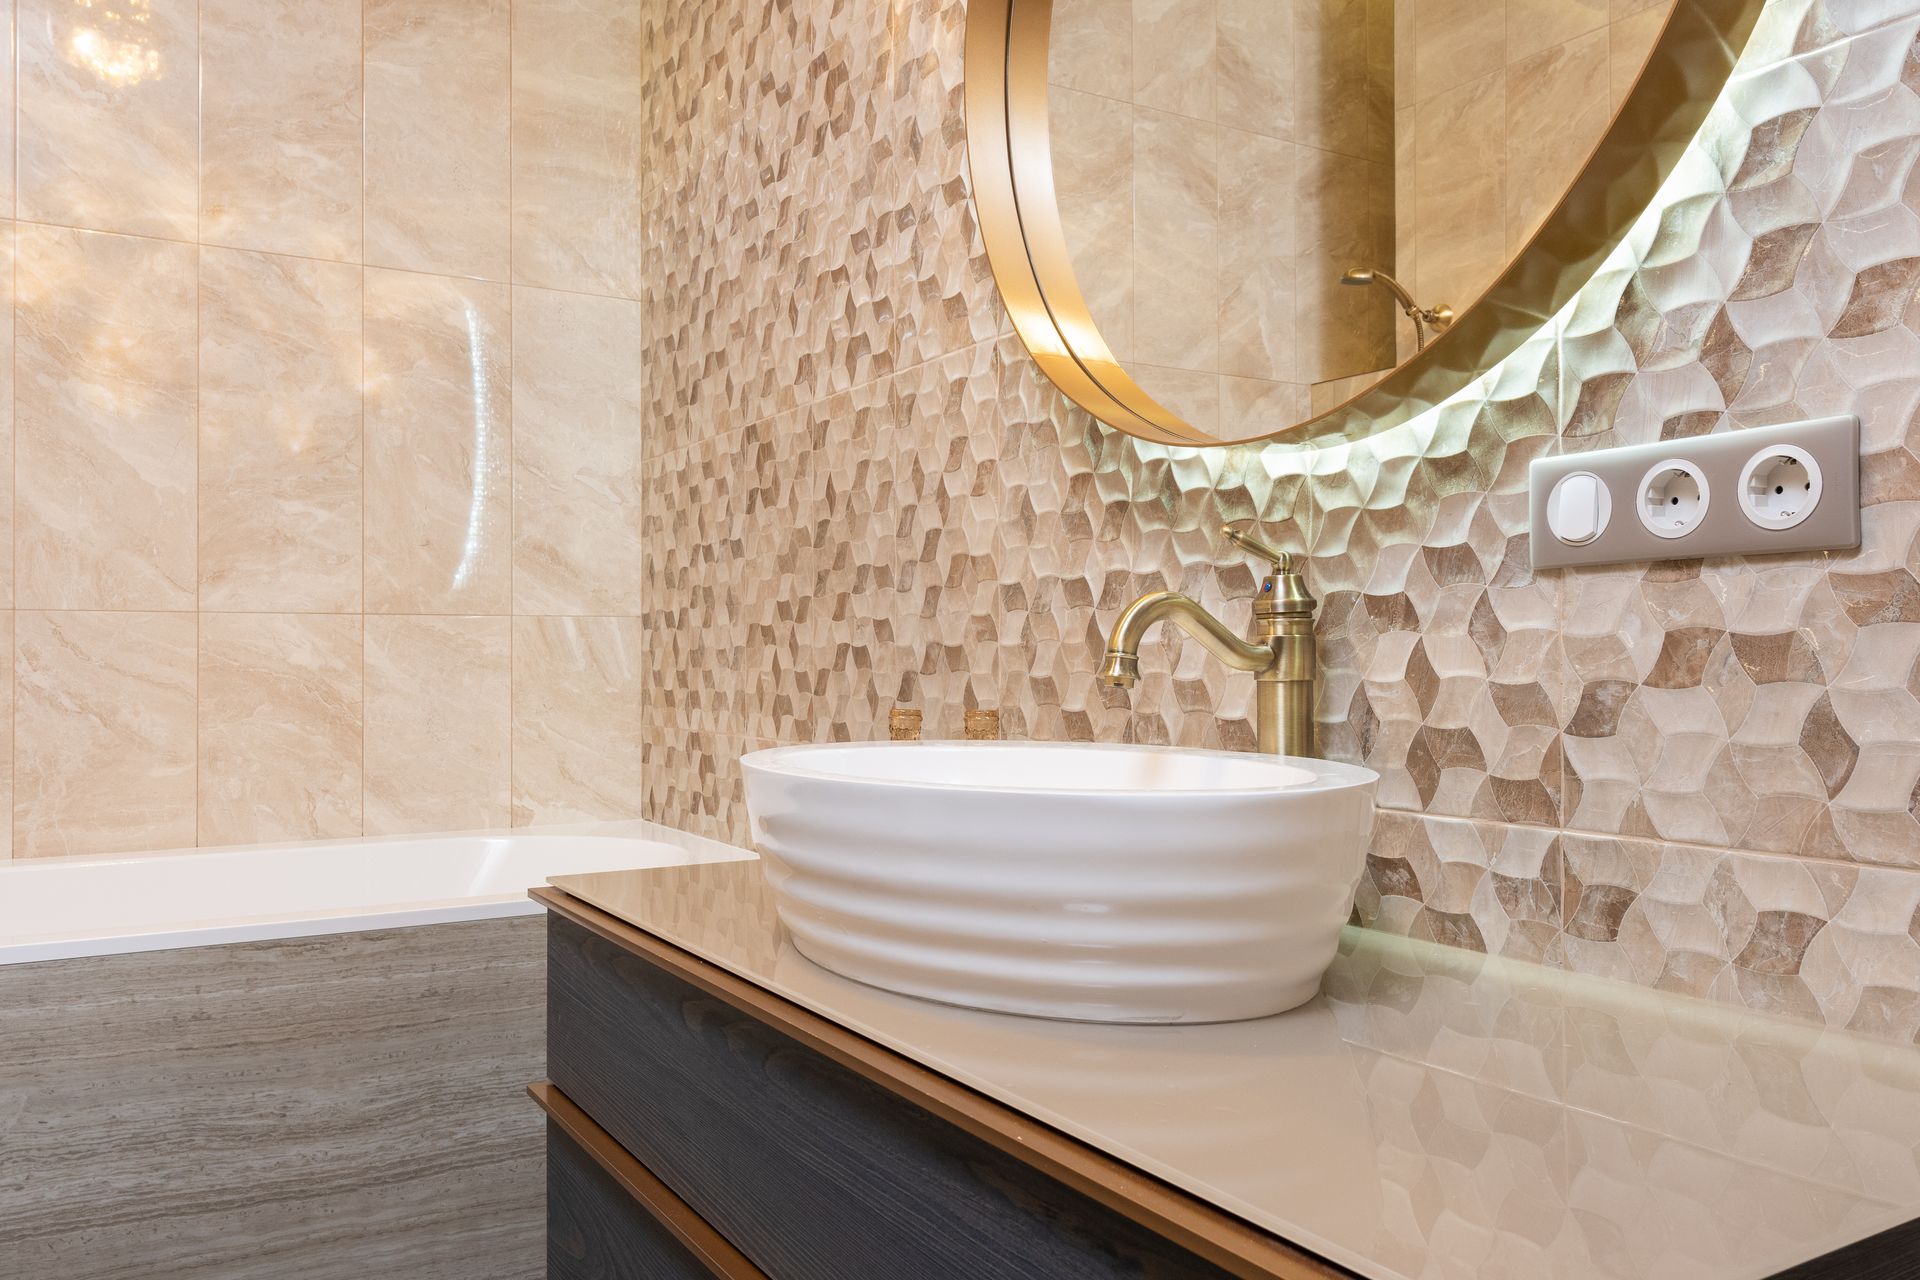 A stand alone sink with a gold faucet sits in front of a geometric tile accent wall